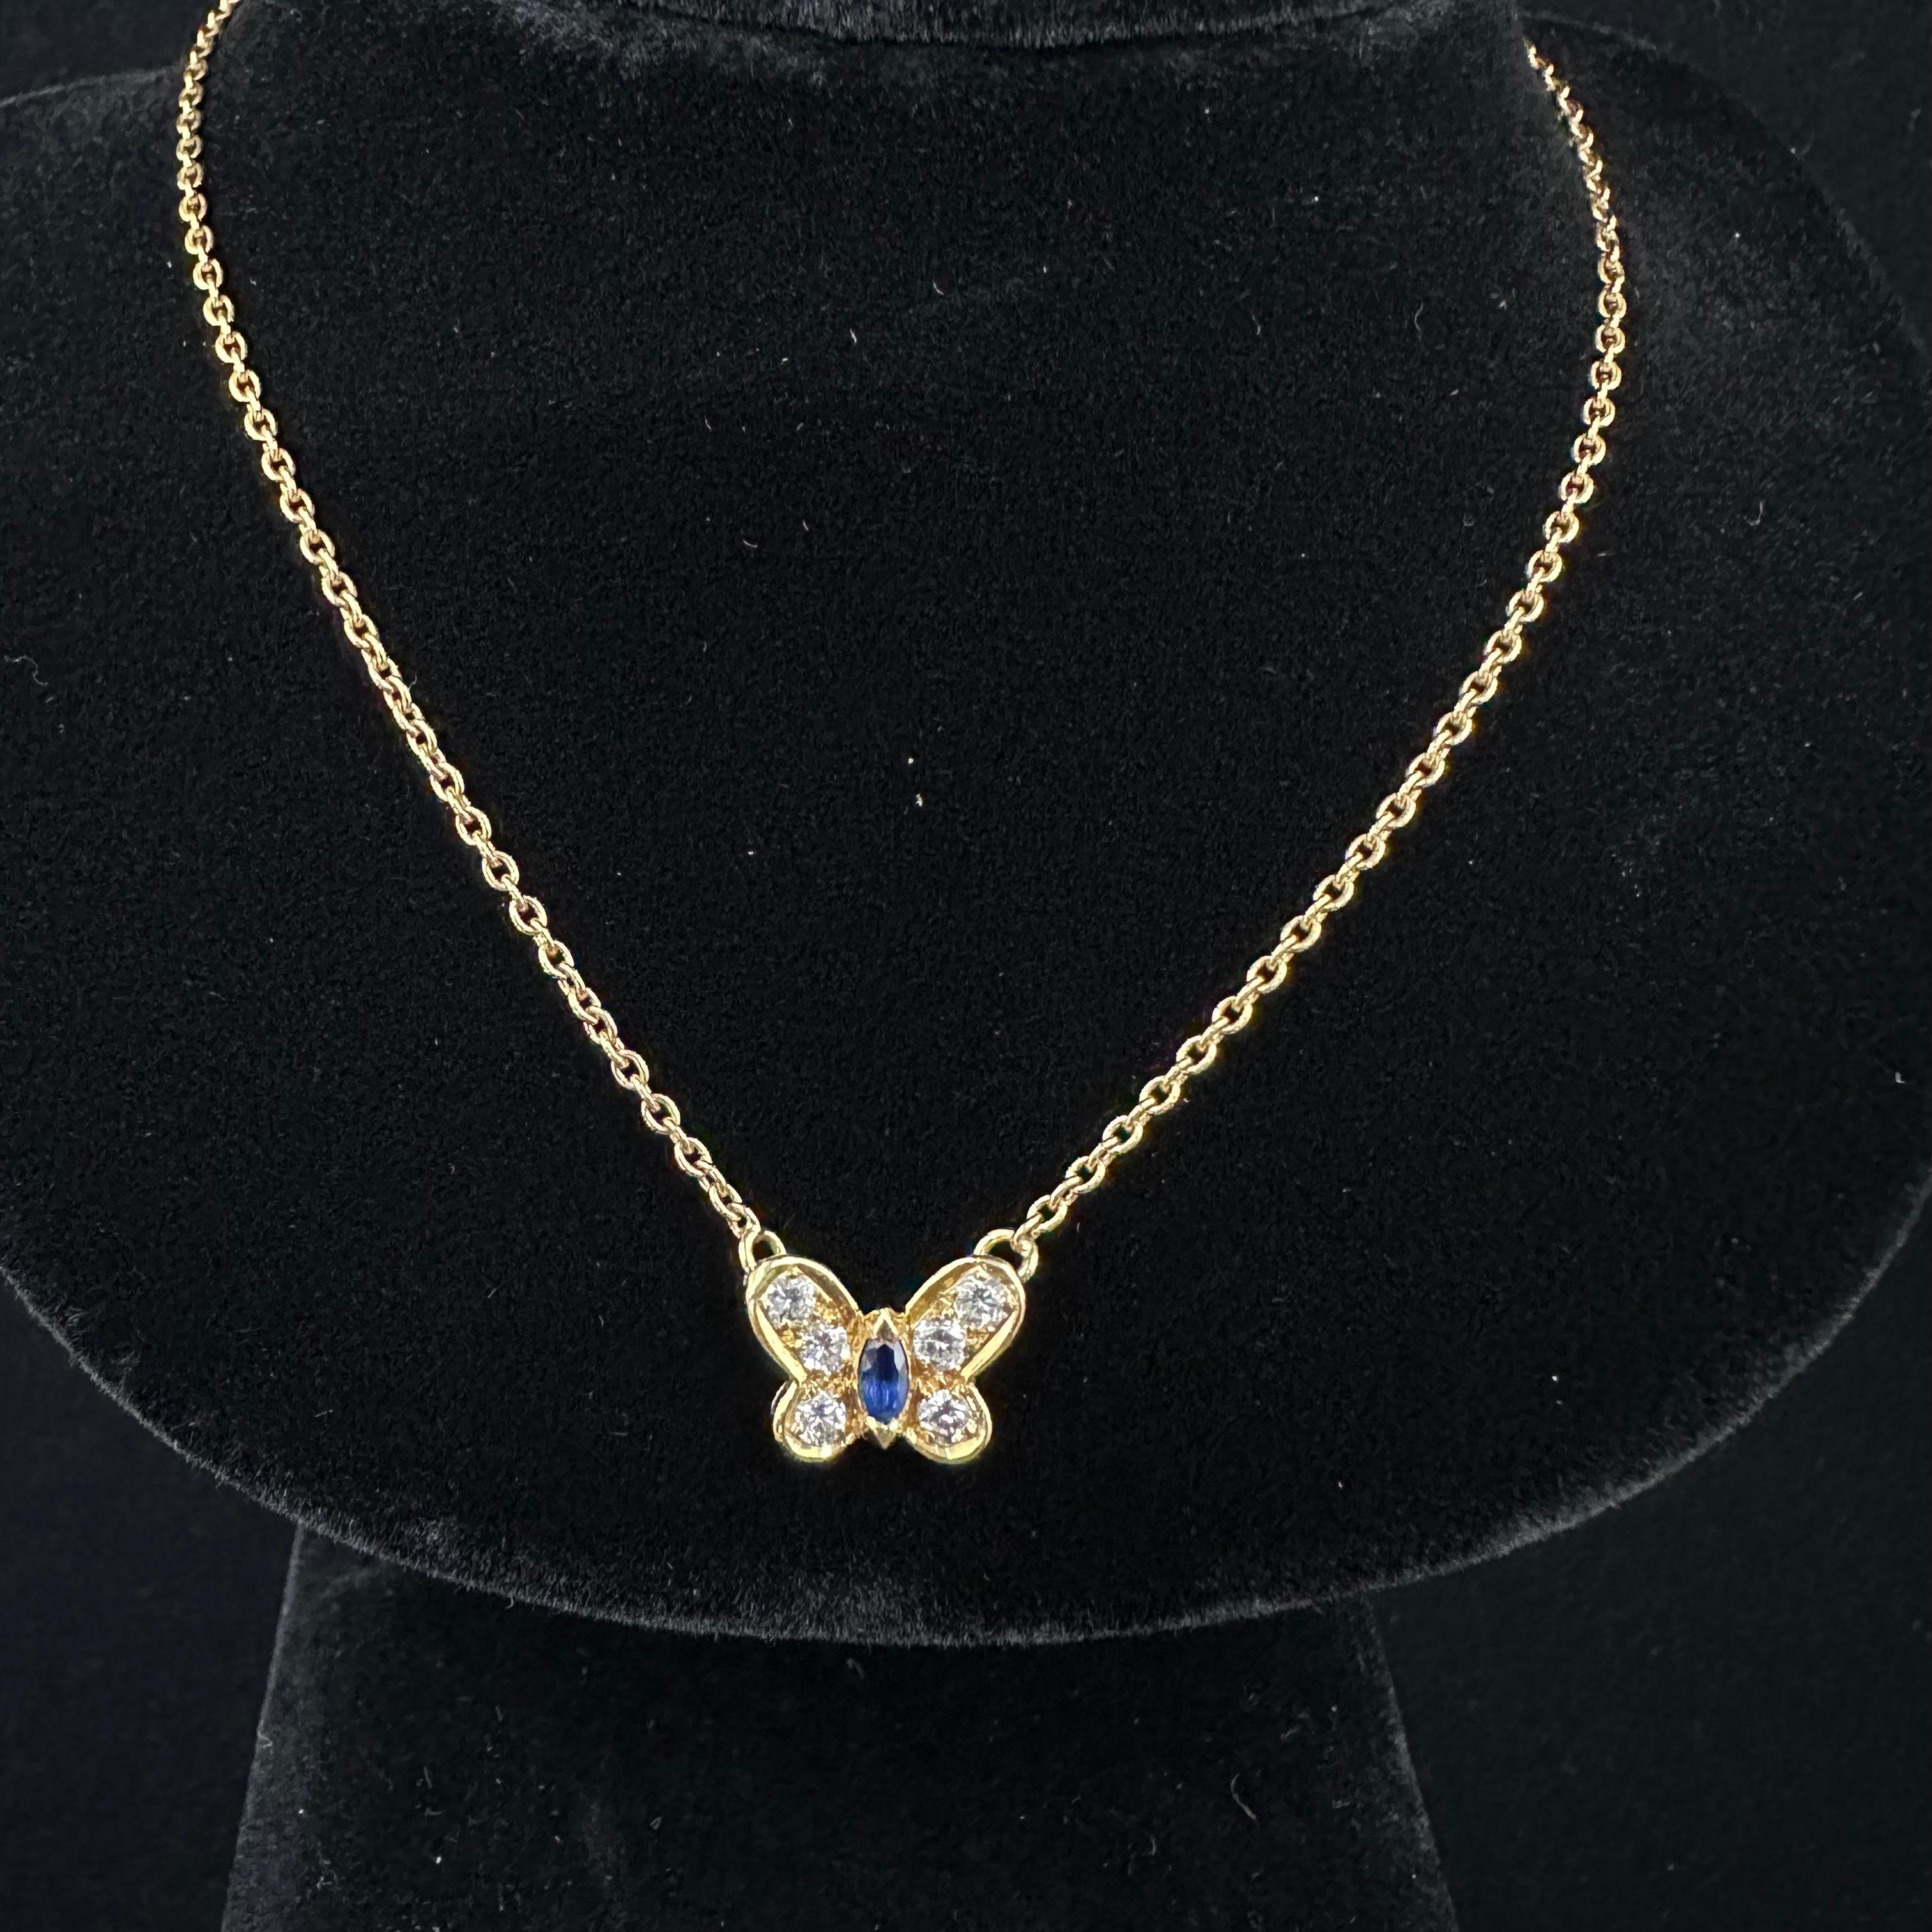 1970's VCA Butterfly Necklace Blue Sapphire  Marquises cut center and Six Rounds. Hallmarked vca 750 Numbered
 18 inch necklace adjustable to 16
Unpolished original patina ,
 
